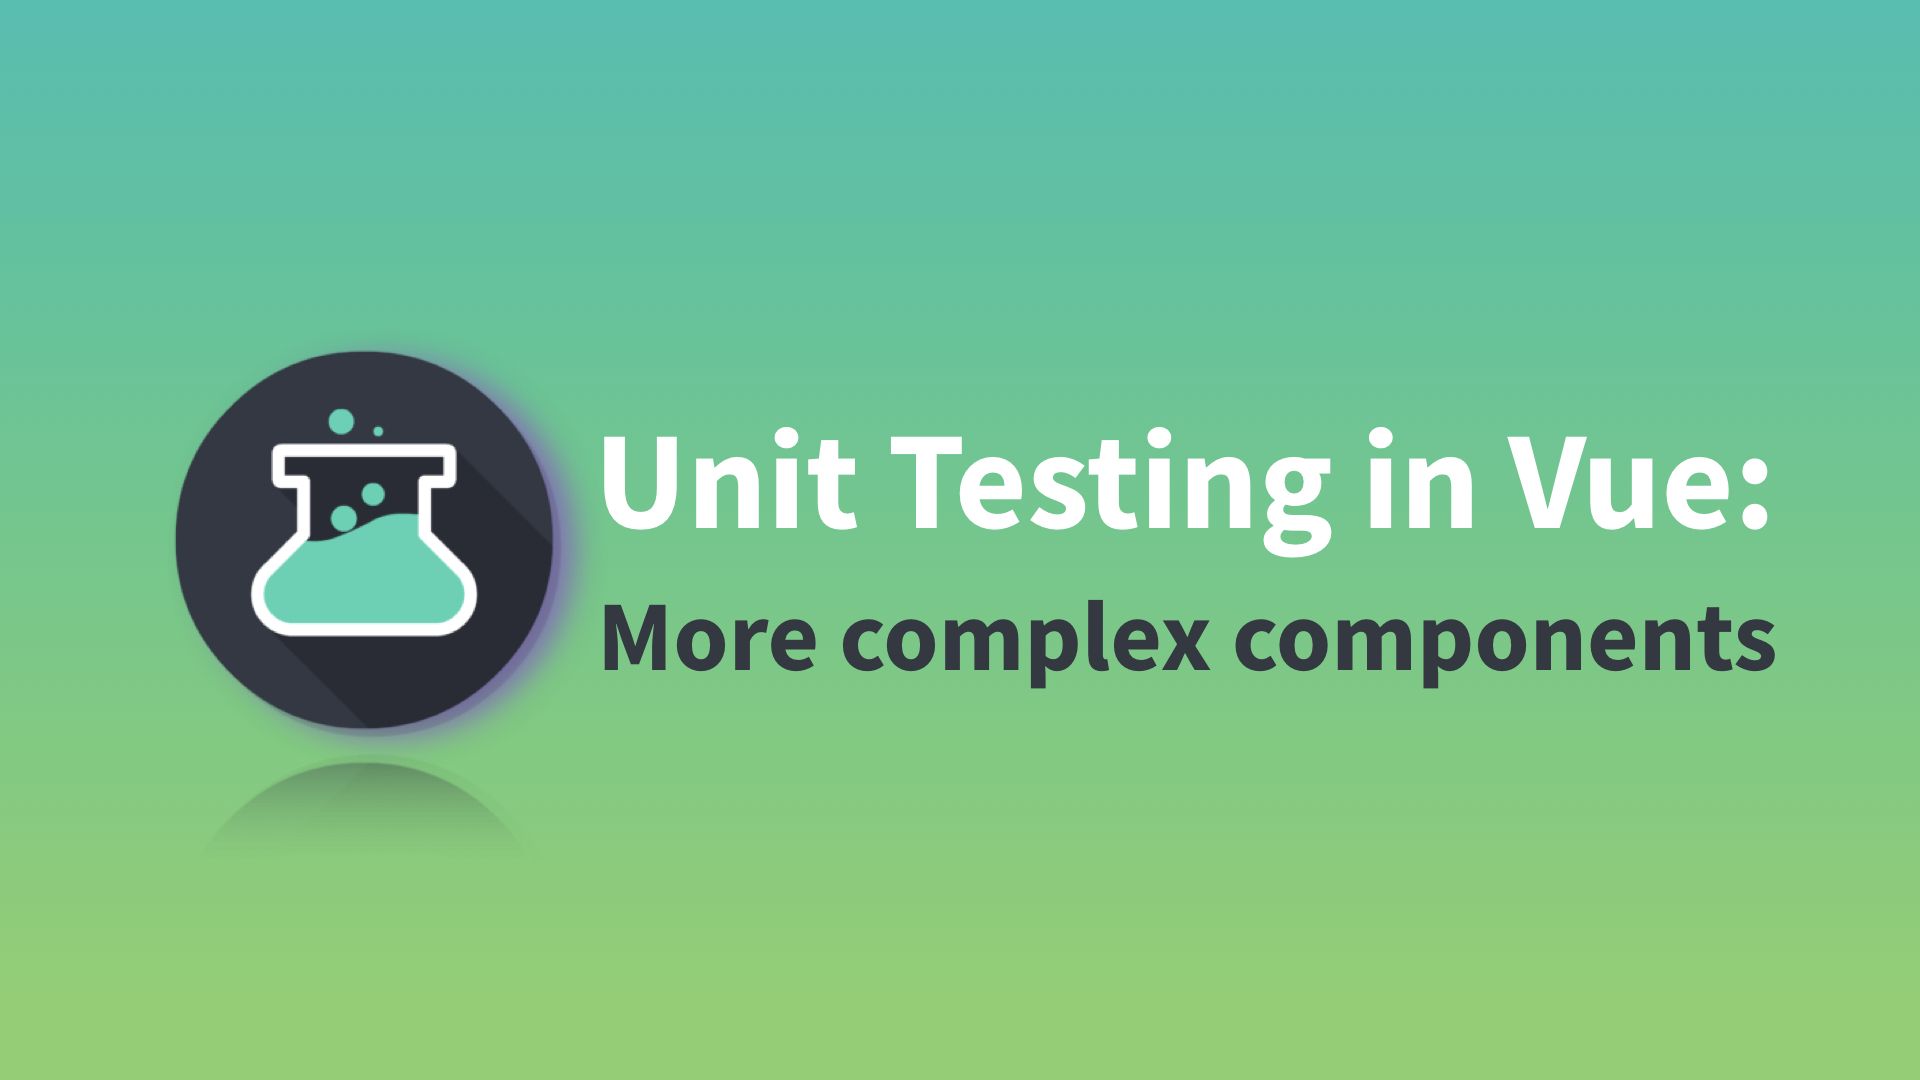 Unit Testing in Vue: More complex components